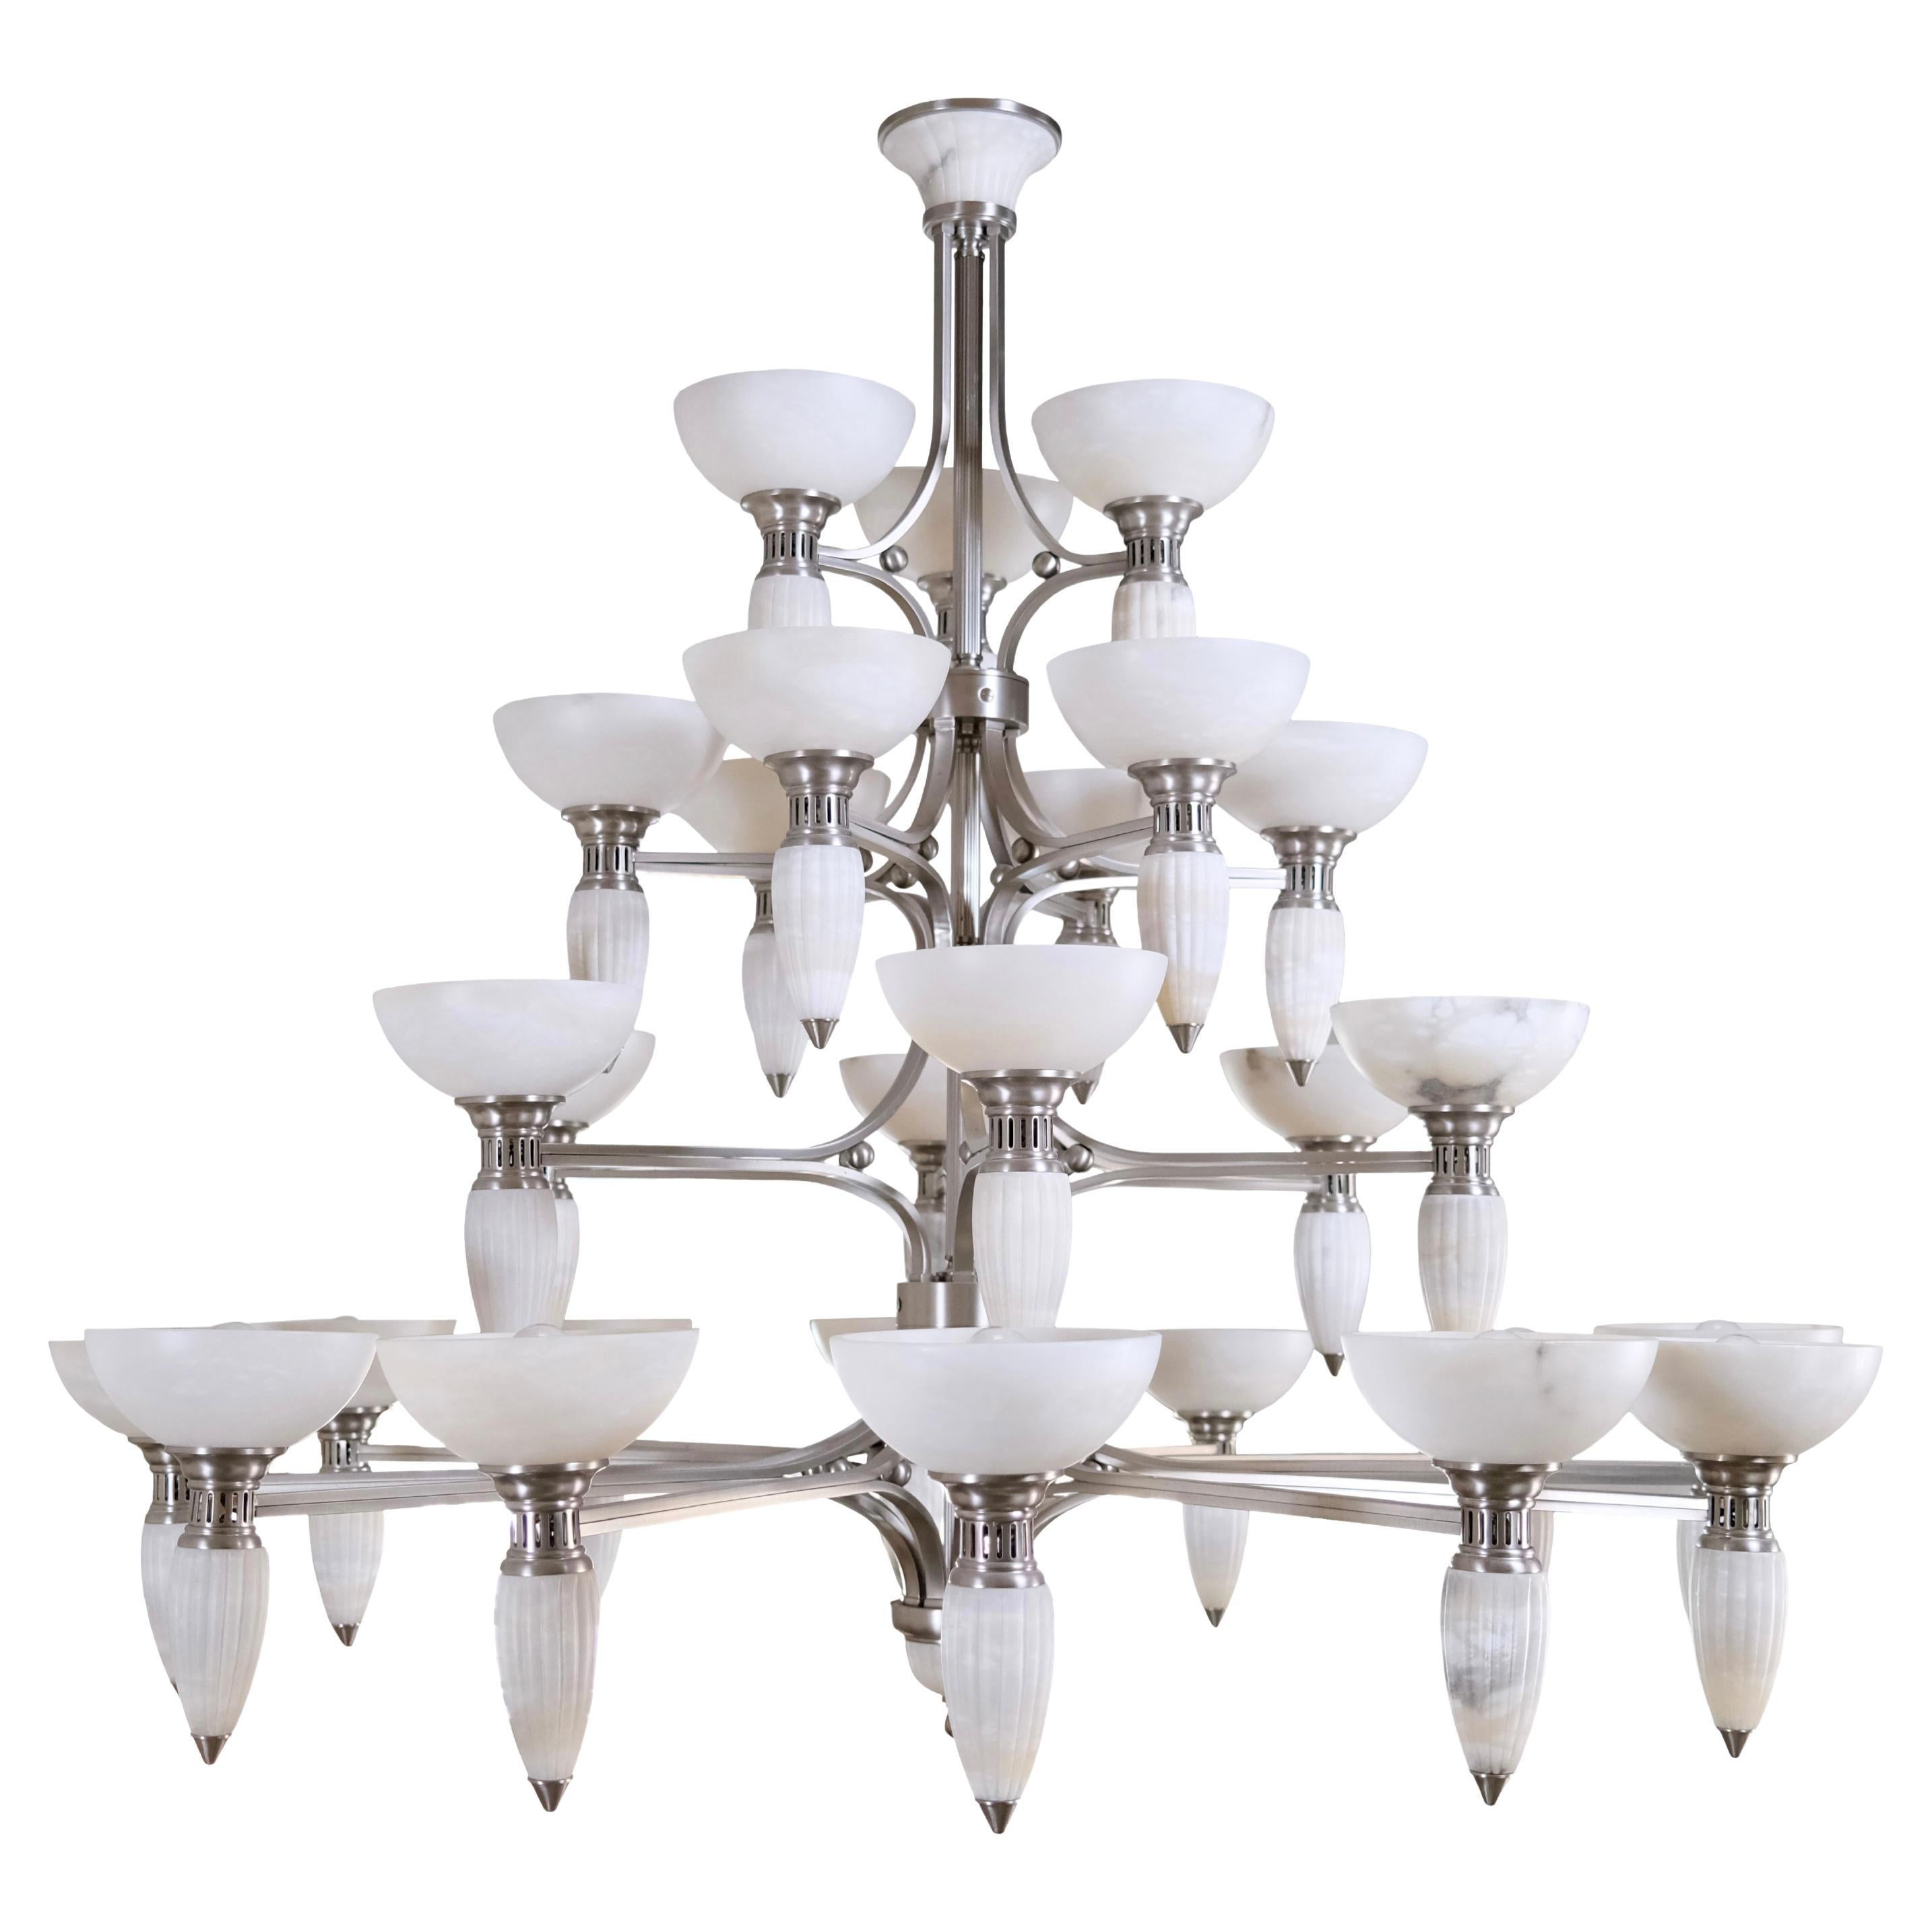 Impressive Art Deco Style Chandelier with Alabaster Bowls and Illuminated Cones For Sale